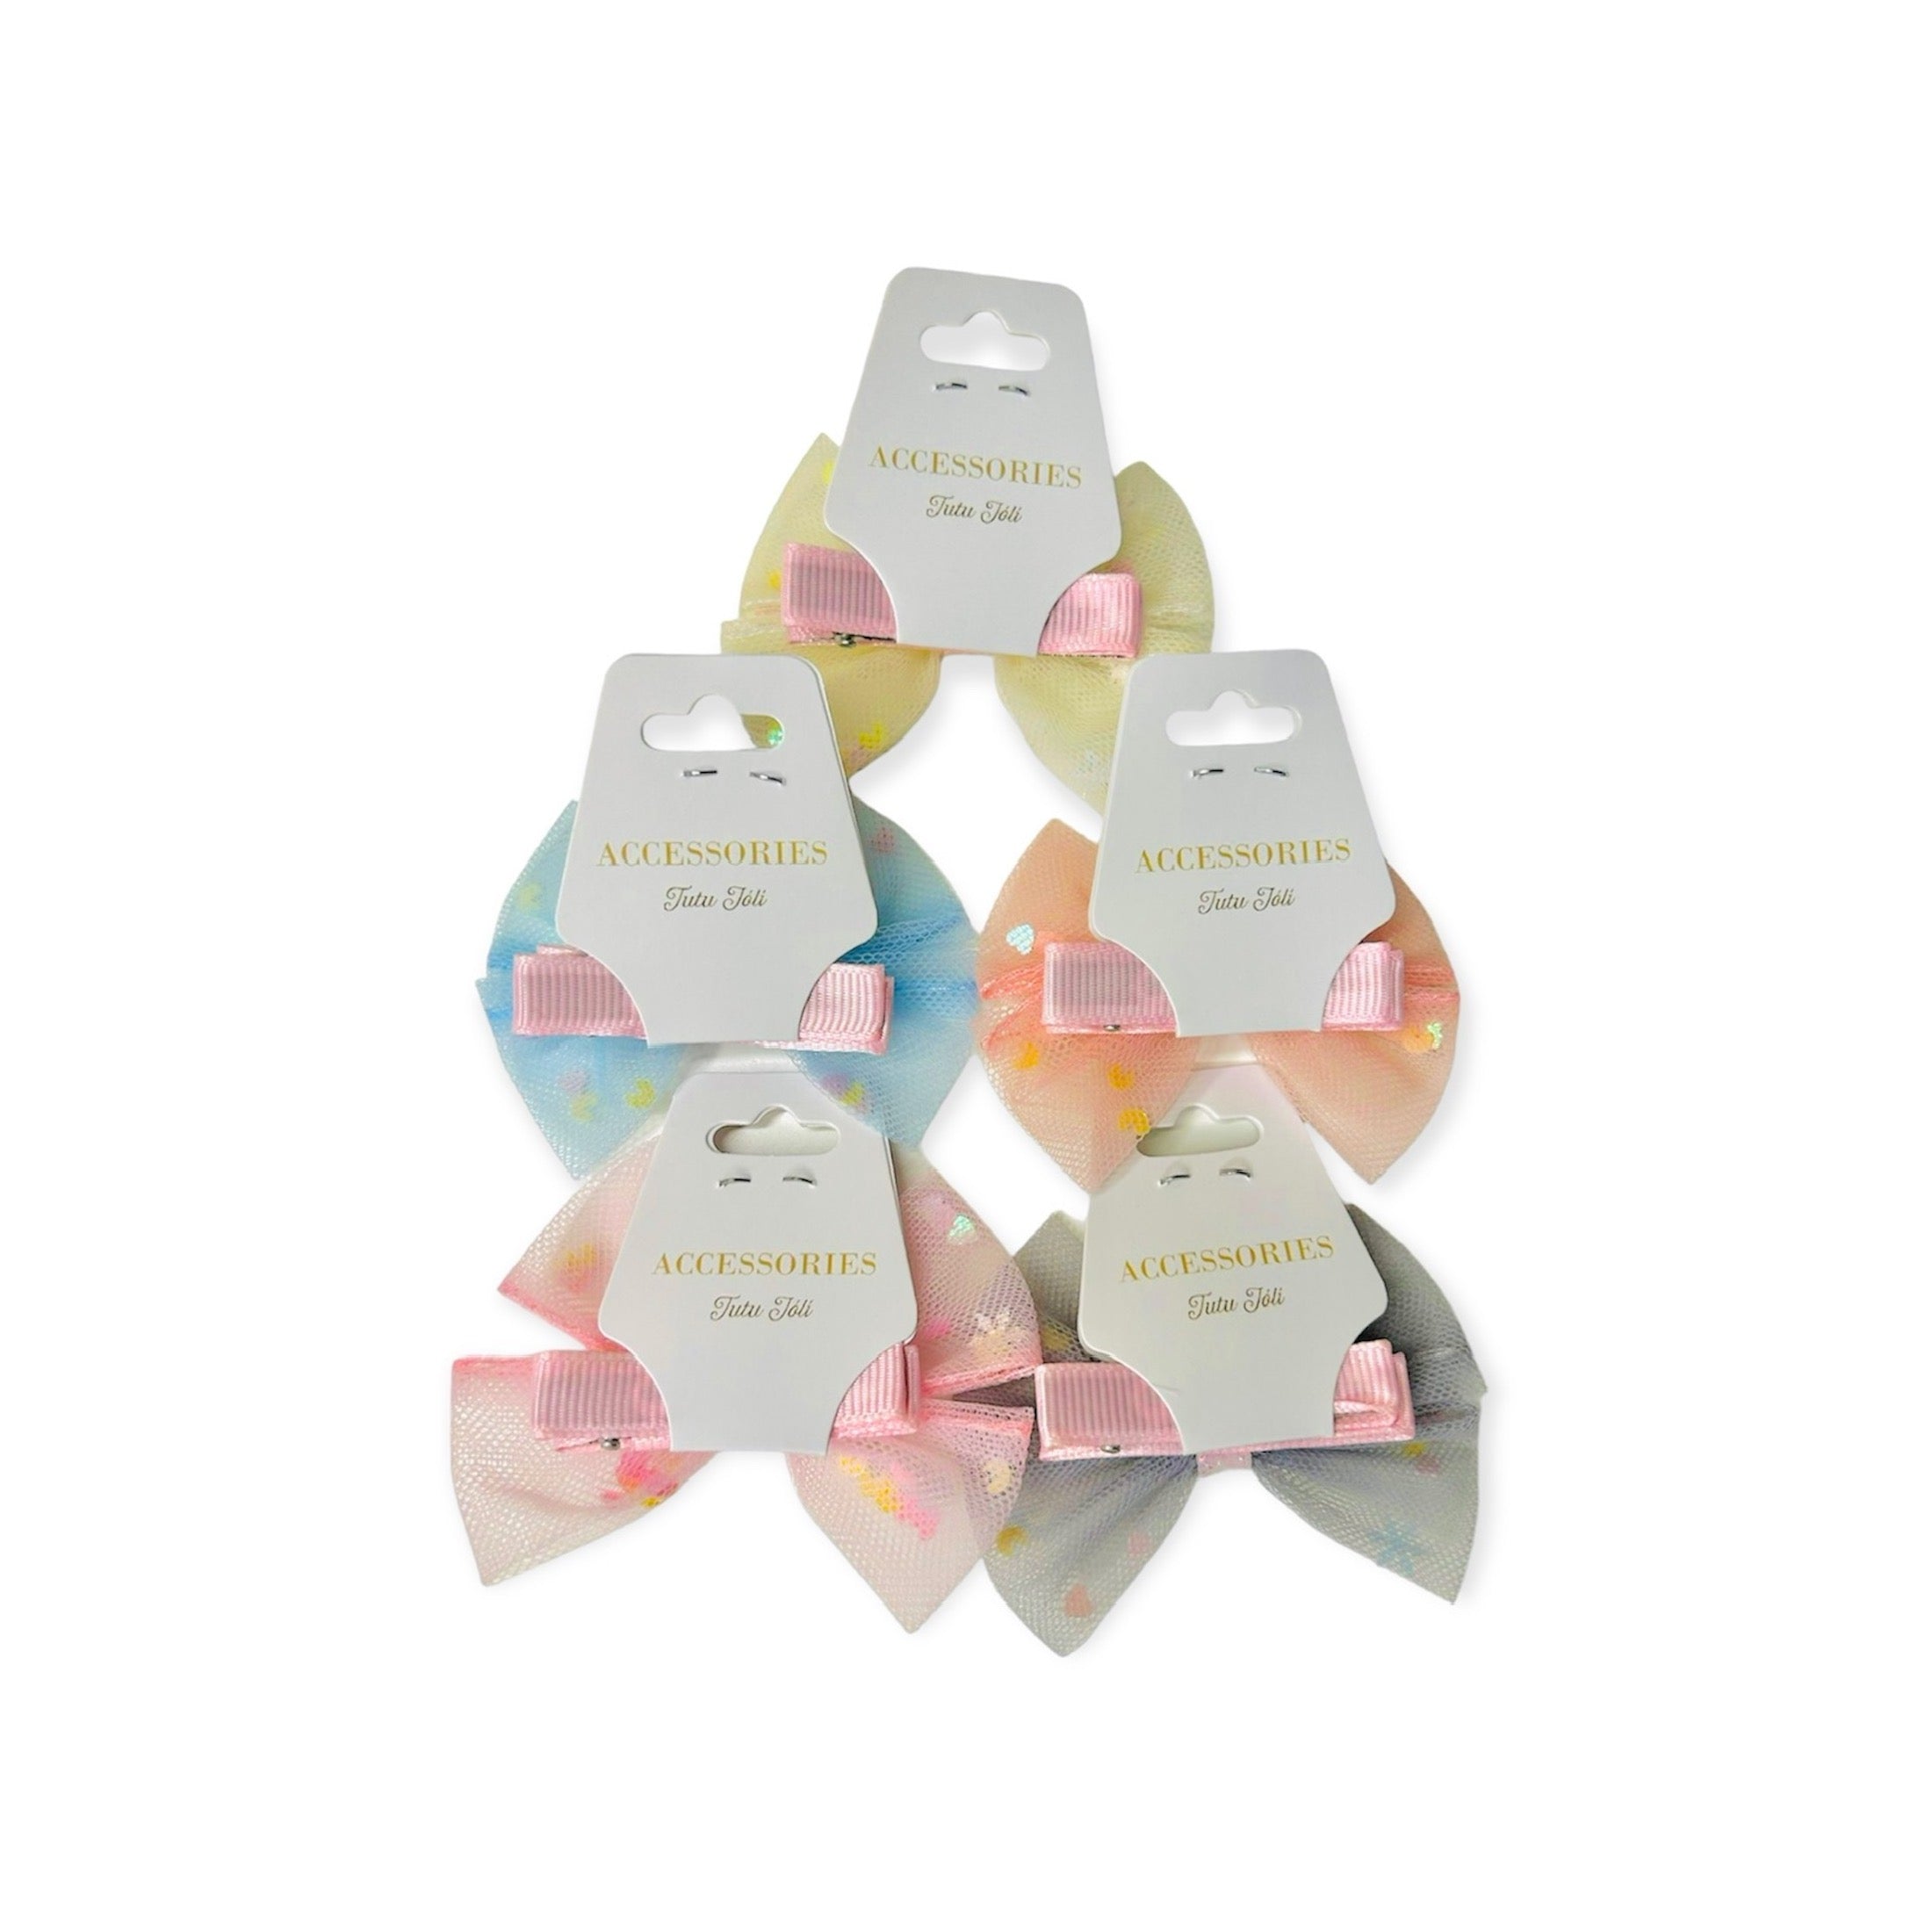 baby bows. toddler bows. toddler hair bows. baby hair clips. baby clips. pink bow clip. gray bow clip. blue bow clip. yellow bow clip. blush bow clip. baby hair accessory. bow hair clip for girls. tutu joli bows. tulle bow clips